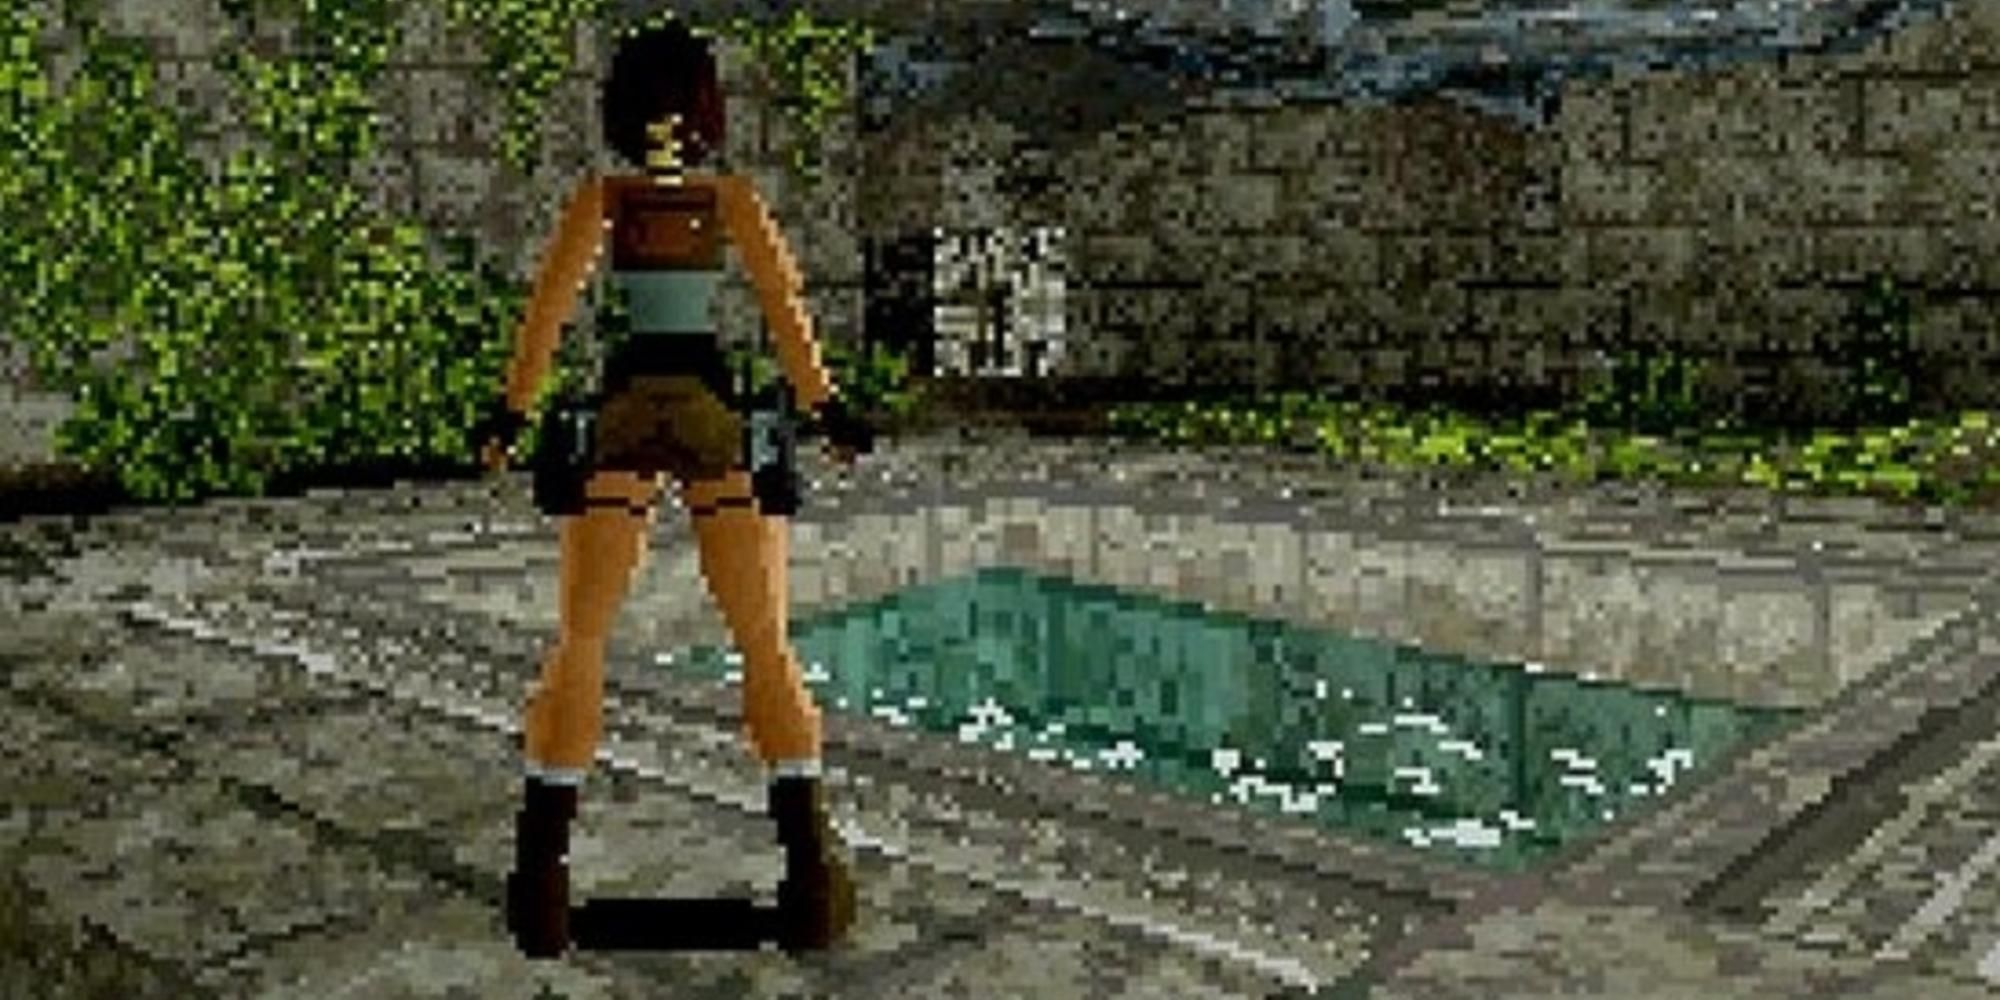 Lara Standing in a tomb in Tomb Raider video game